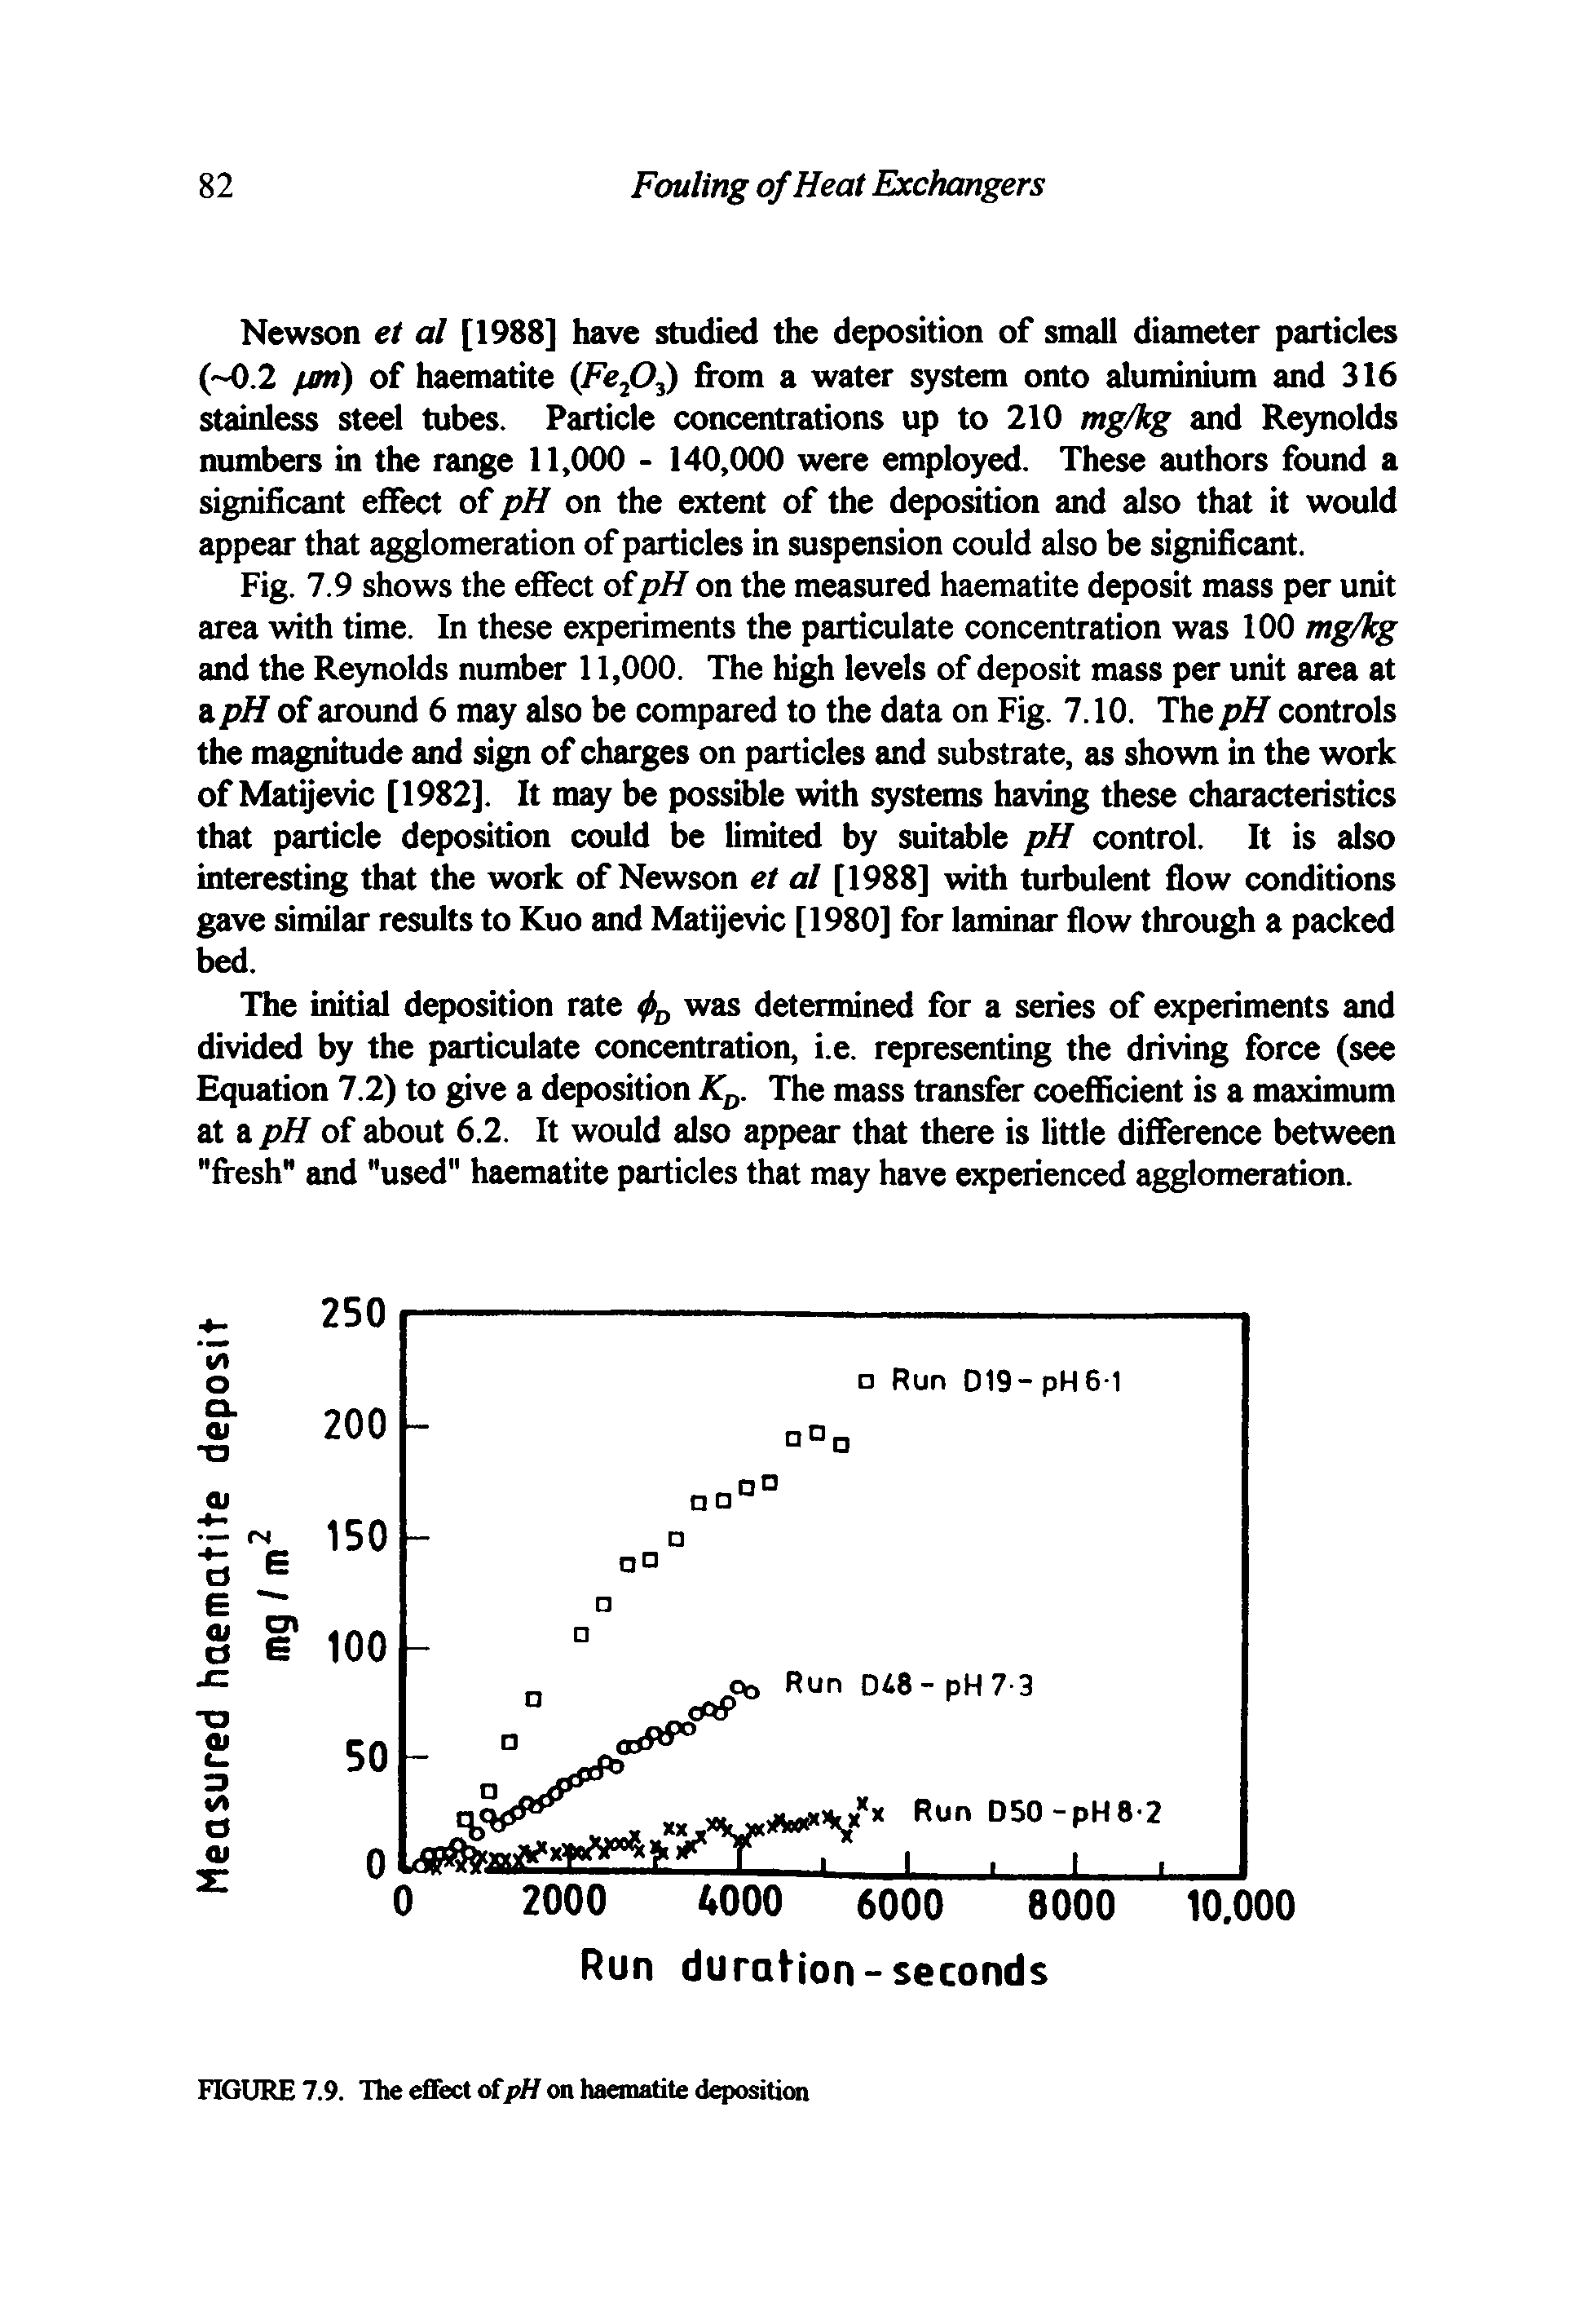 Fig. 7.9 shows the effect ofpH on the measured haematite deposit mass per unit area with time. In these experiments the particulate concentration was 100 mg/kg and the Reynolds number 11,000. The high levels of deposit mass per unit area at a pH of around 6 may also be compared to the data on Fig. 7.10. The pH controls the magnitude and sign of charges on particles and substrate, as shown in the work of Matijevic [1982]. It may be possible with systems having these characteristics that particle deposition could be limited by suitable pH control. It is also interesting that the work of Newson et al [1988] with turbulent flow conditions gave similar results to Kuo and Matijevic [1980] for laminar flow through a packed bed.